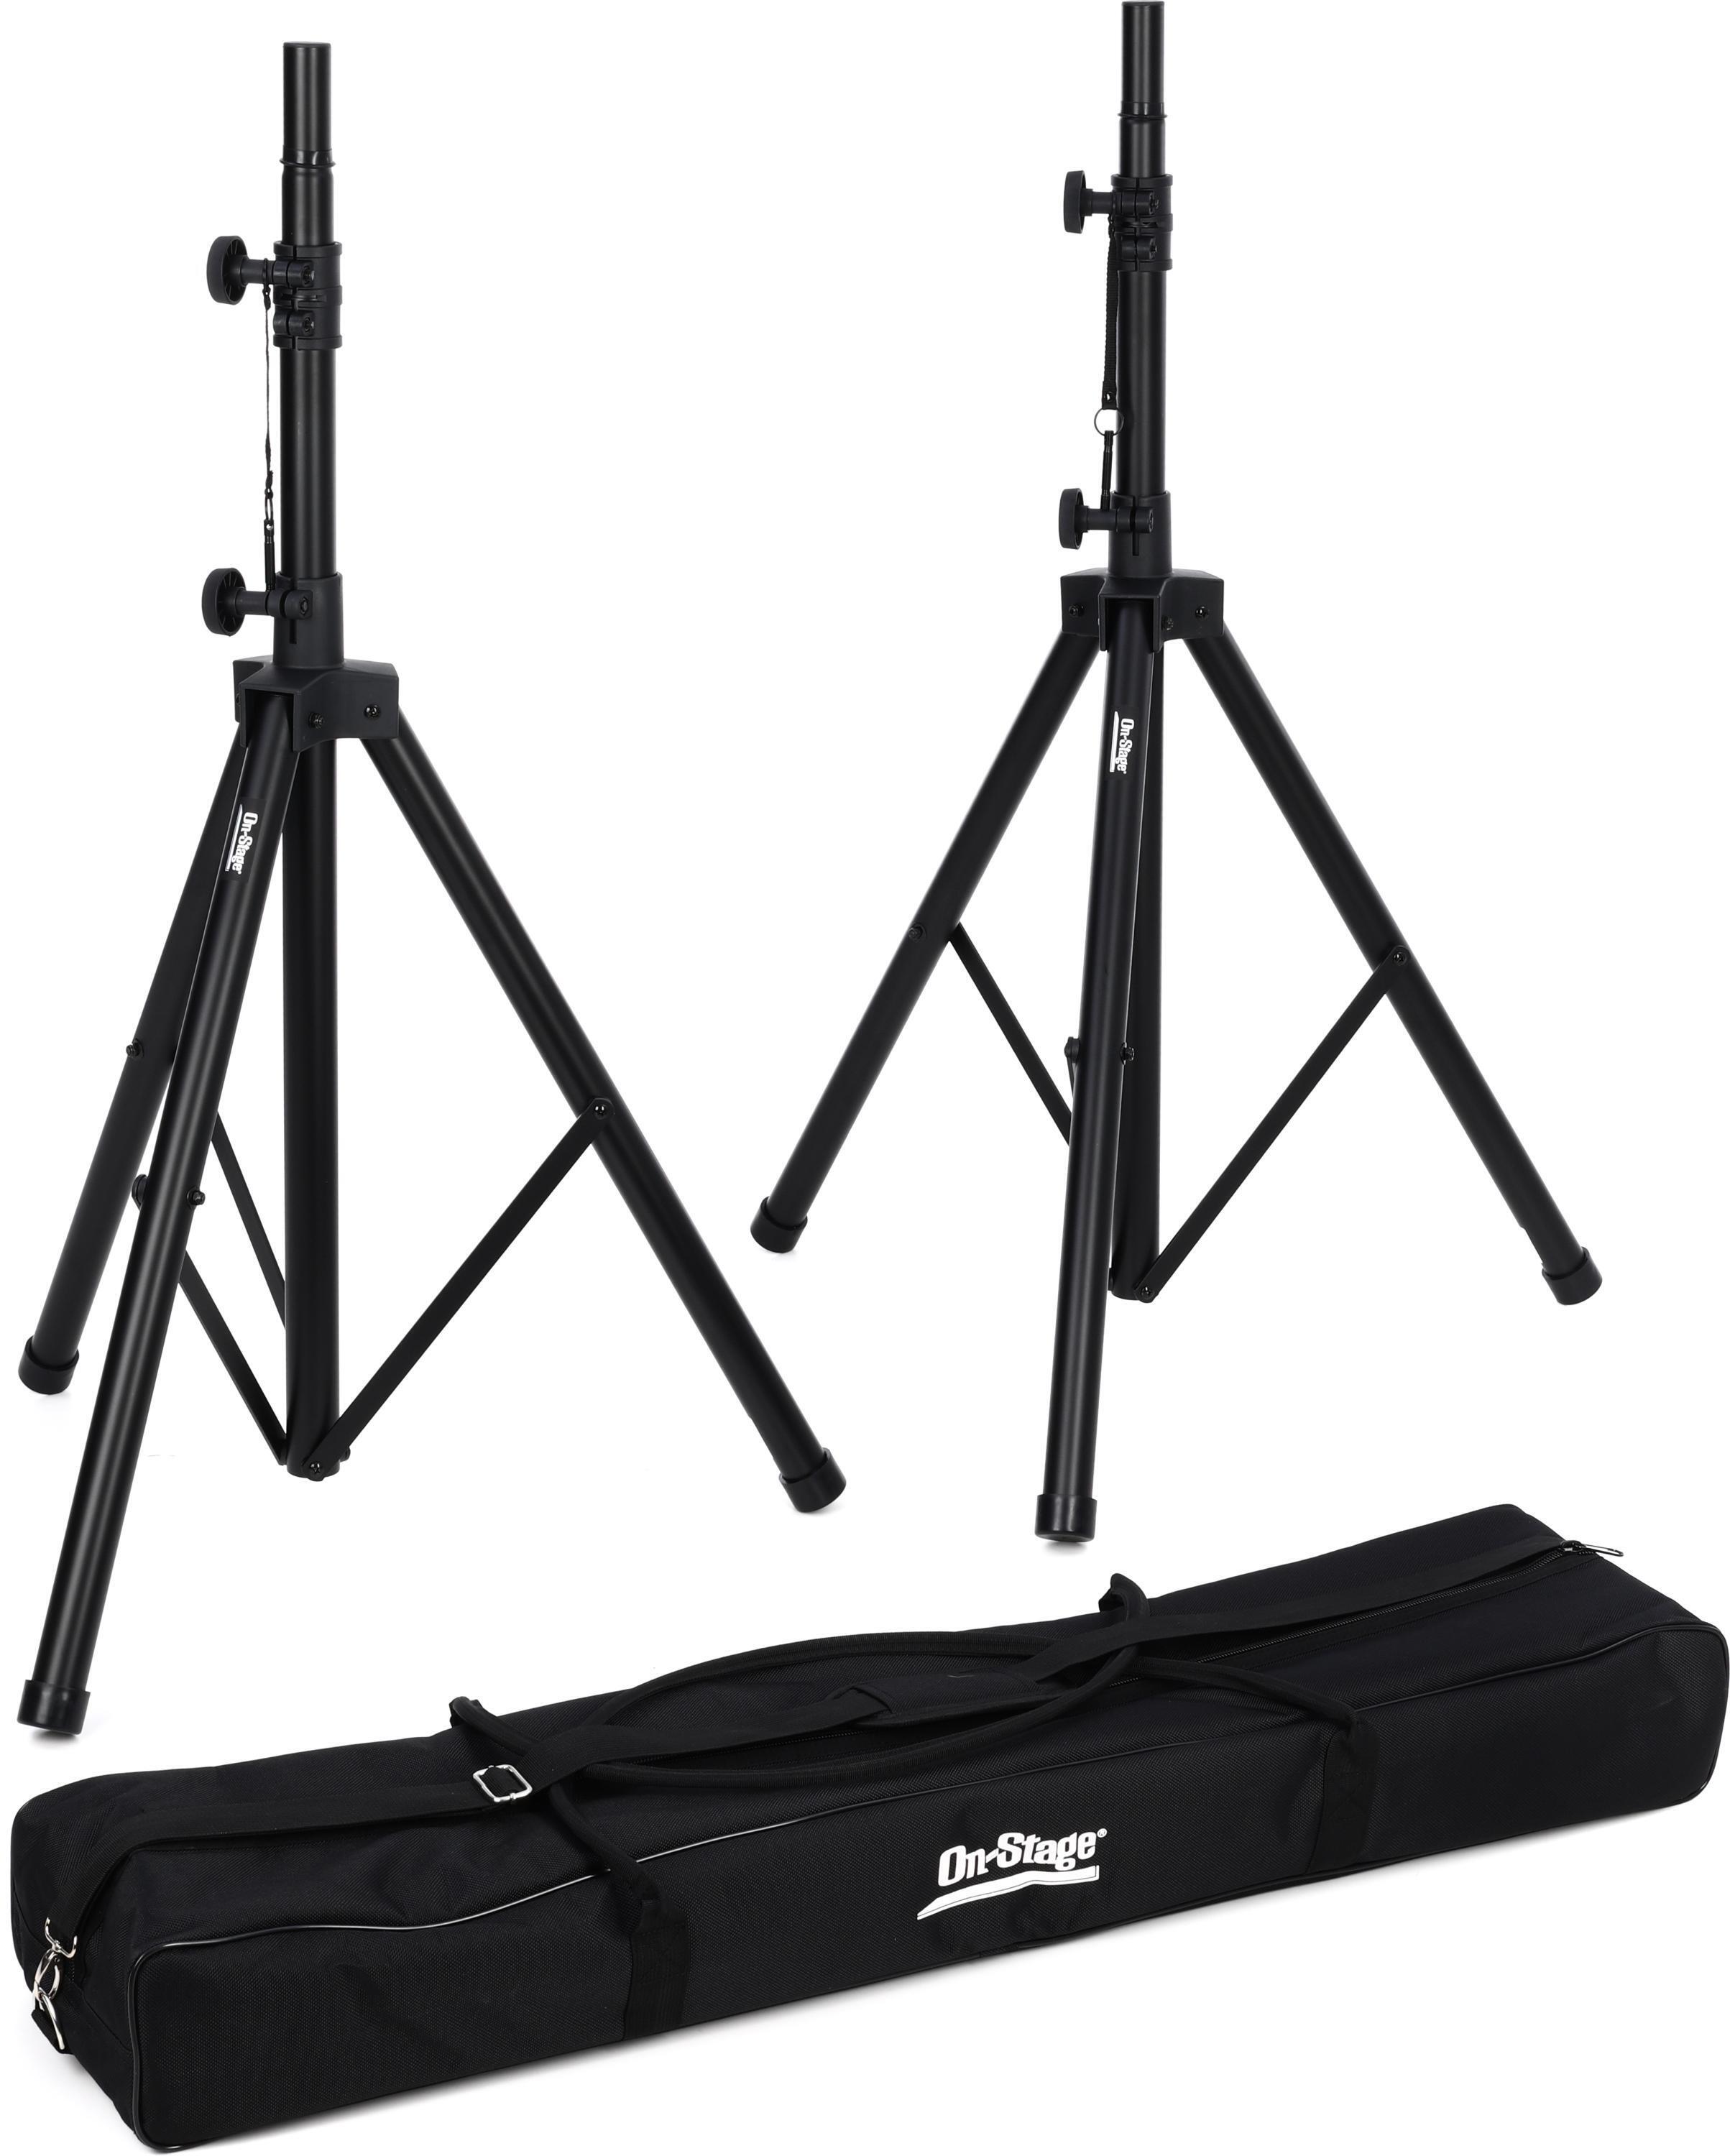 On-Stage SSP7950 All-aluminum Speaker Stand Pack with Bag